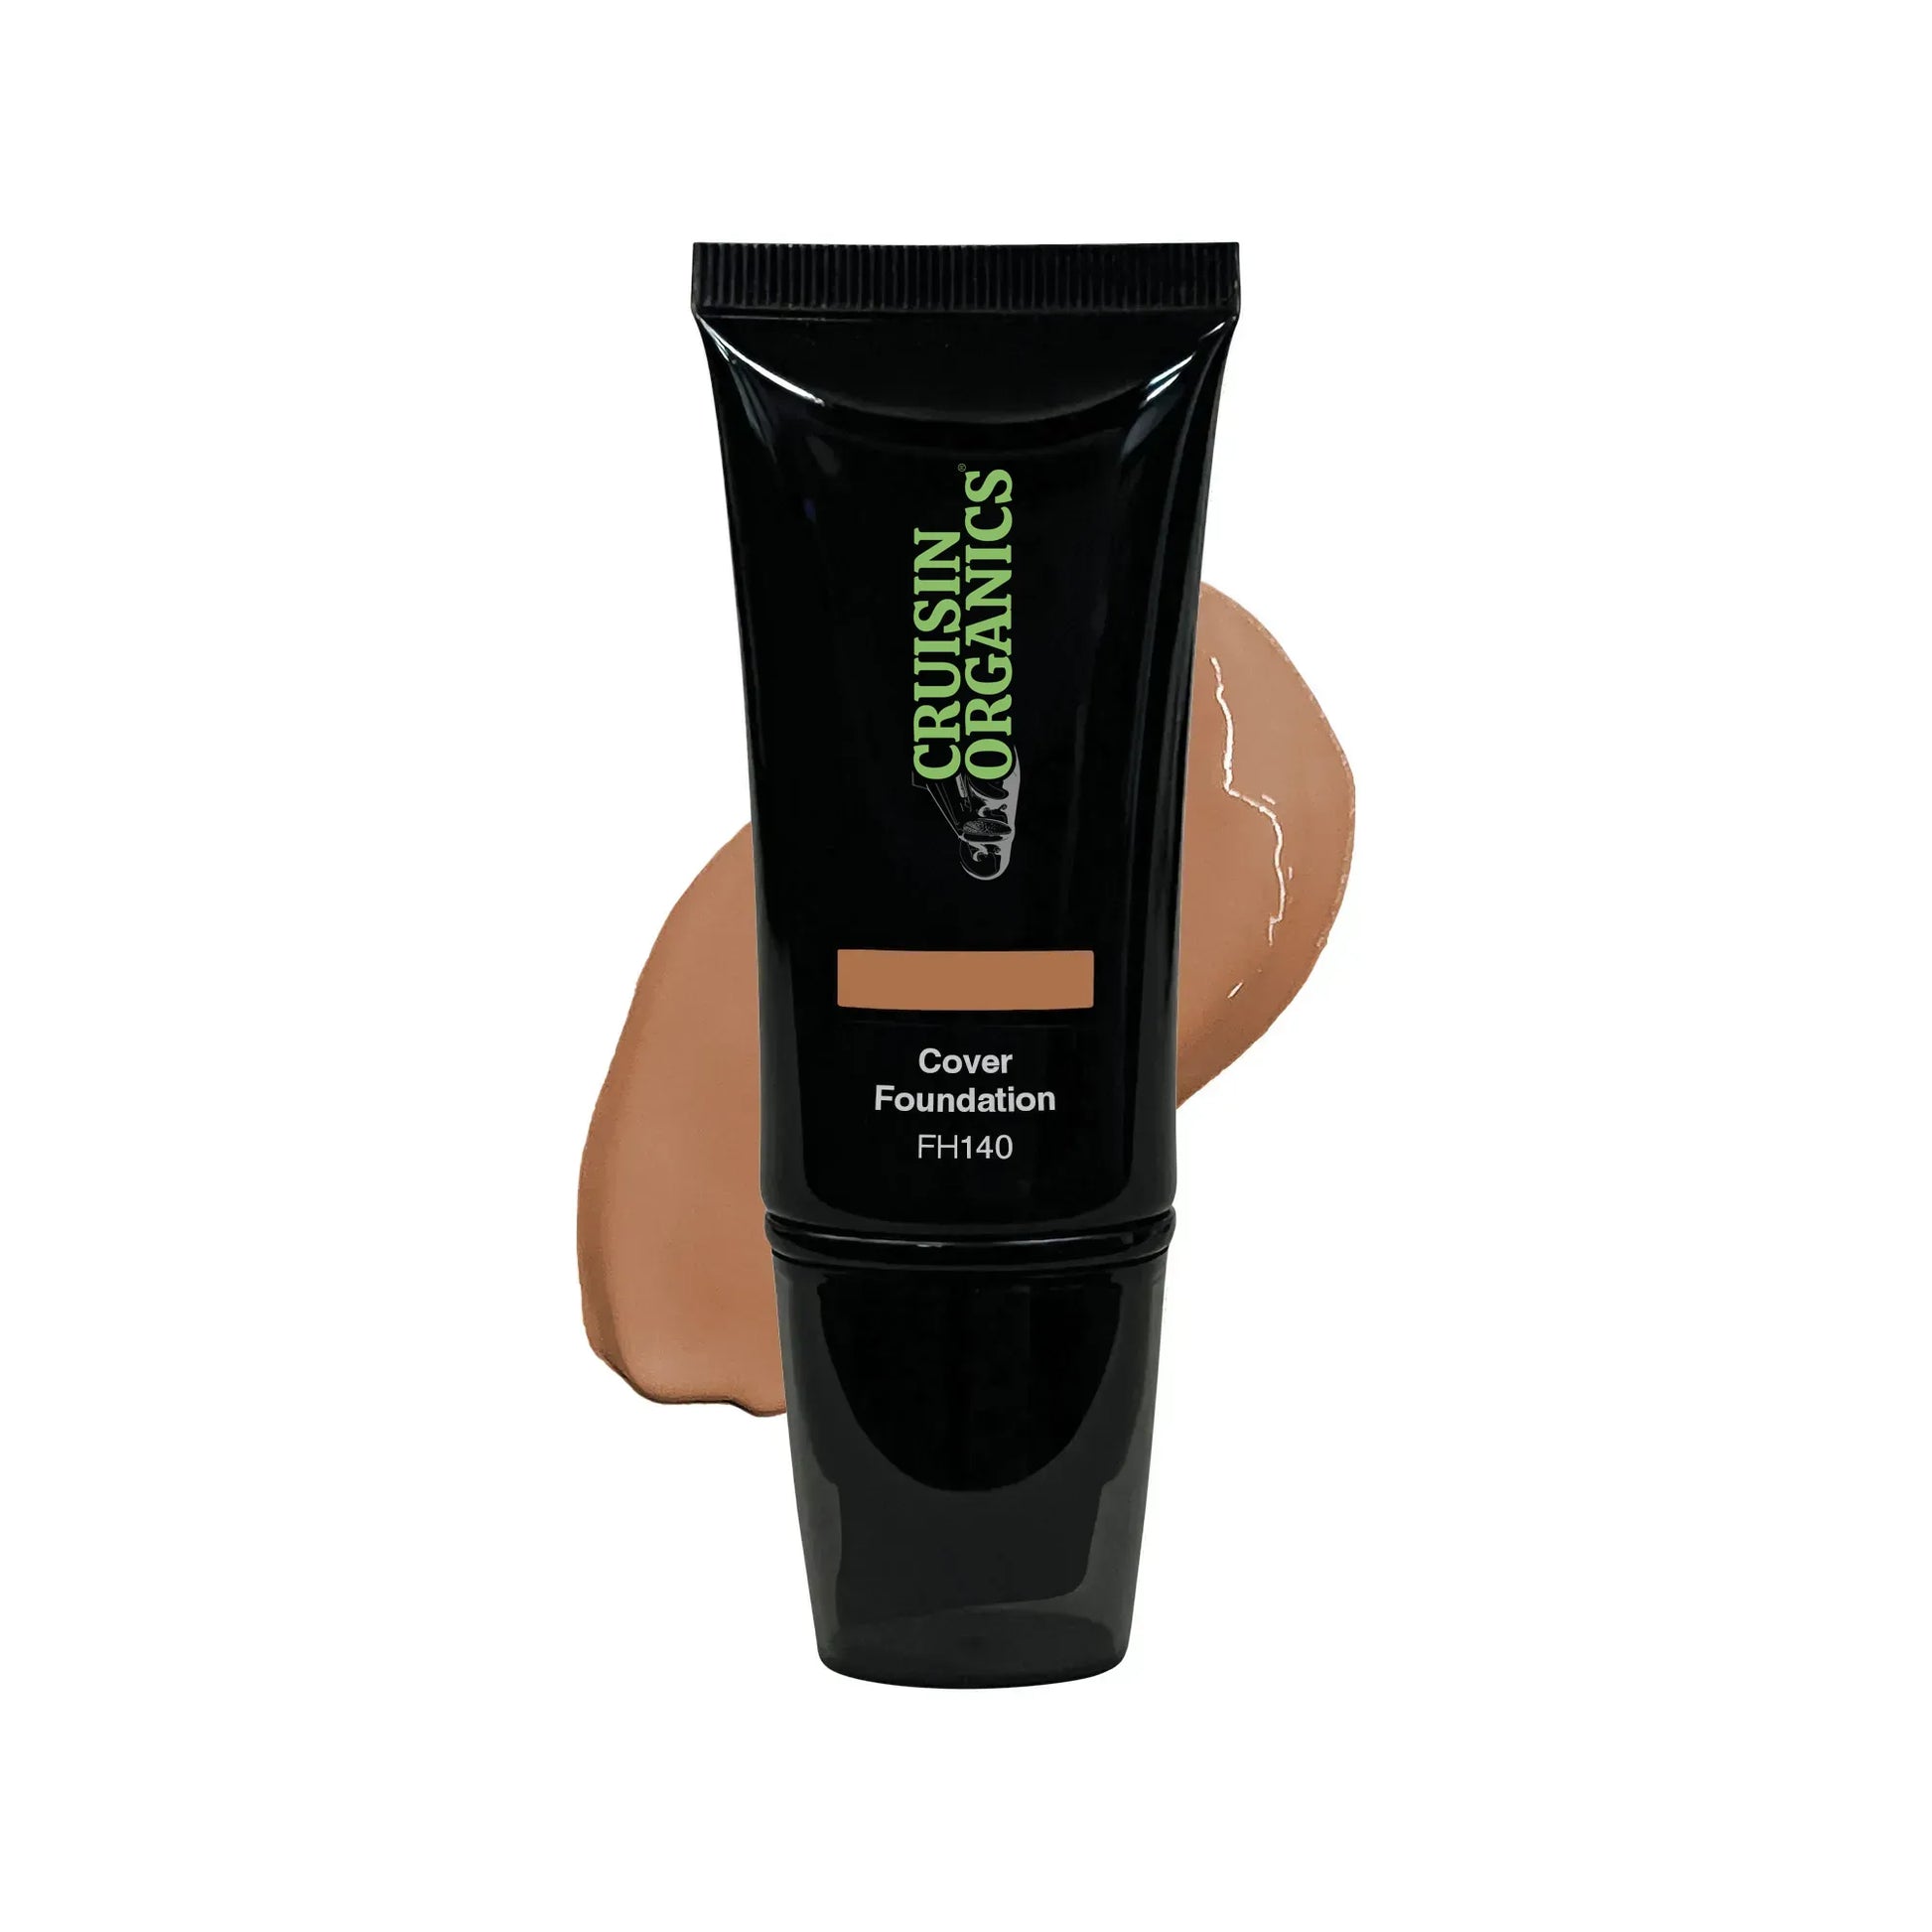 Indulge in luxury with Cruisin Organics Mellow Foundation. Our full cover foundation features Magnesium Palmitate, ensuring a smooth and unimpaired finish without any clumps or lumps. Experience a flawless complexion like never before with our Anticaking technology.